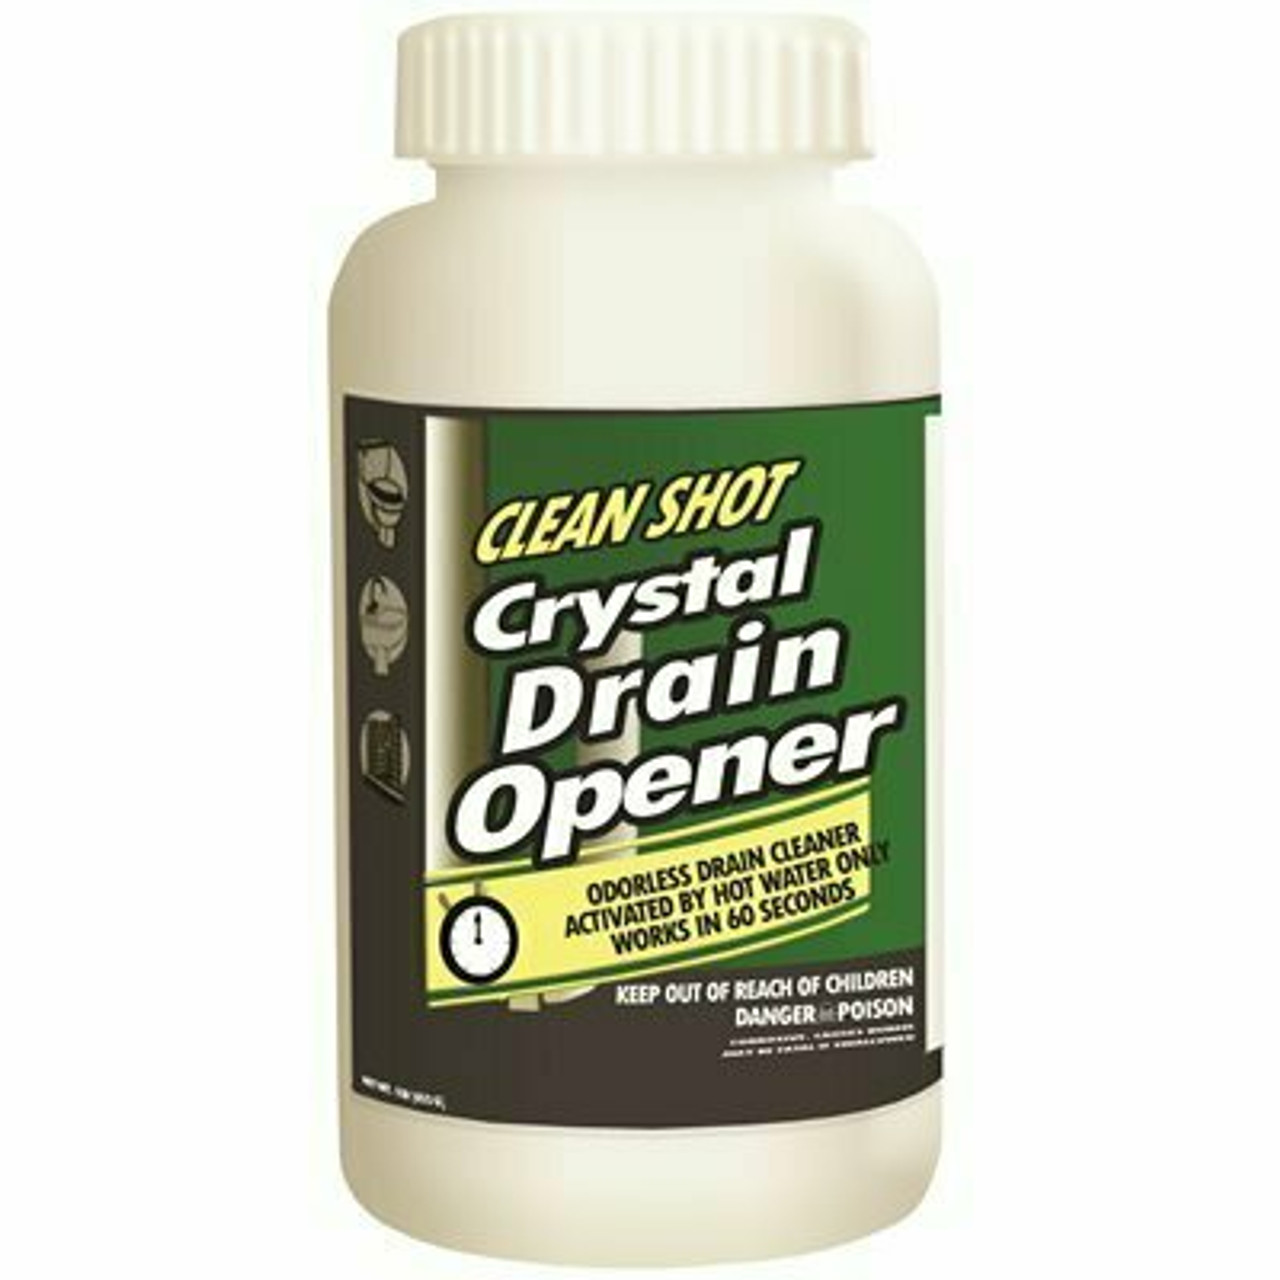 Theochem Laboratories 1 Lb. Clean Shot Crystal Drain Opener And Cleaner